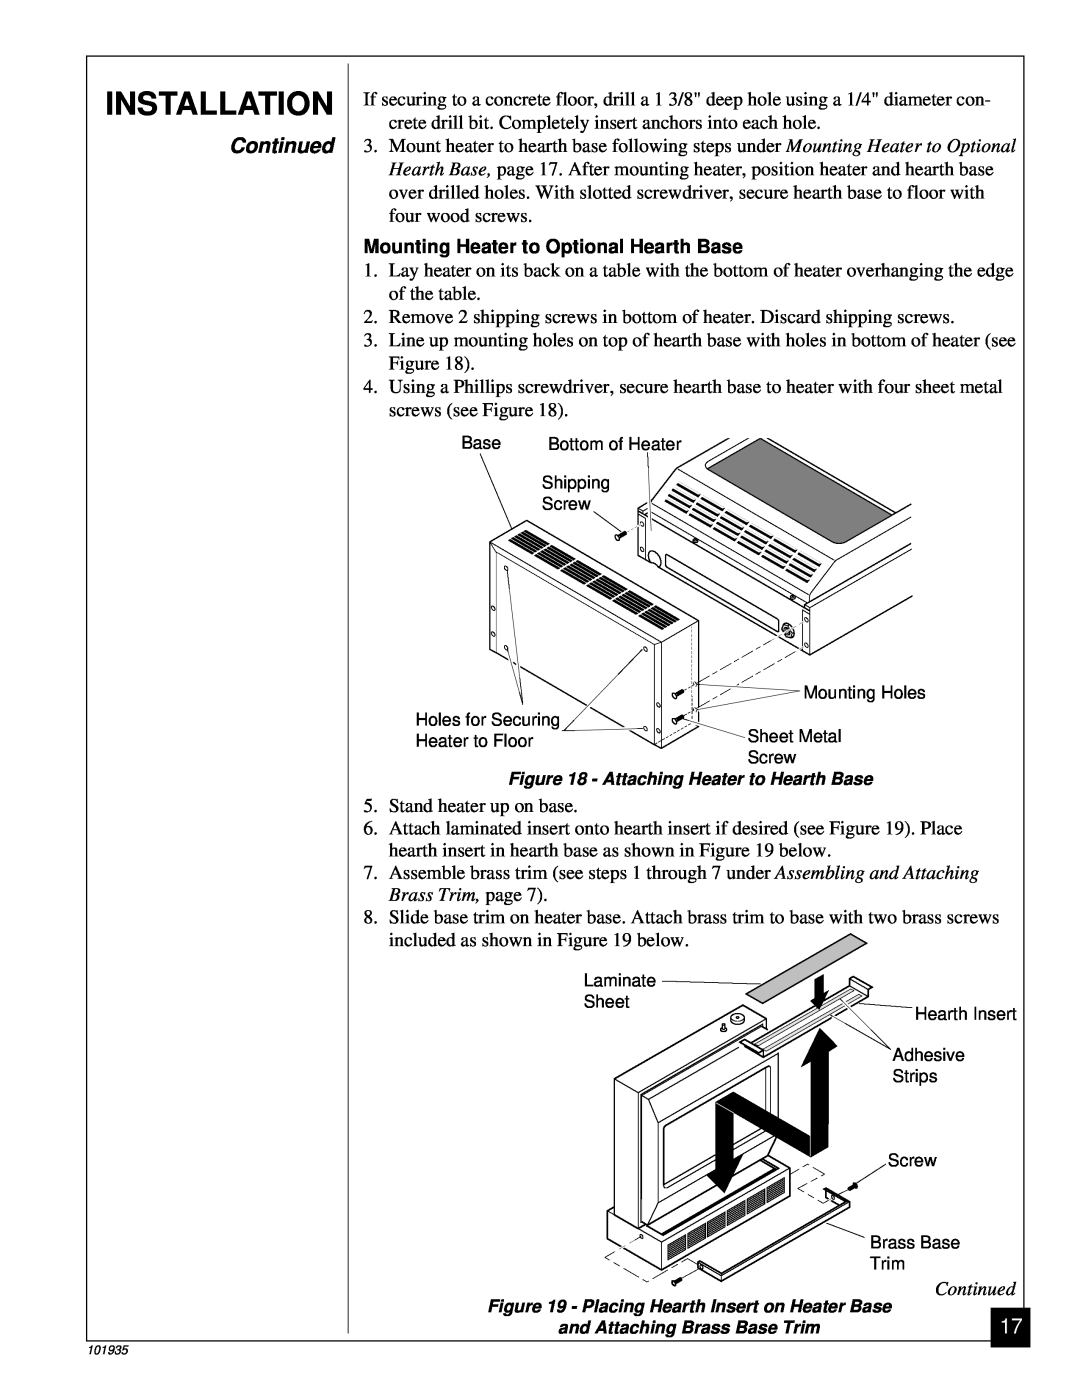 Desa RFP28TB installation manual Mounting Heater to Optional Hearth Base, Installation, Continued 